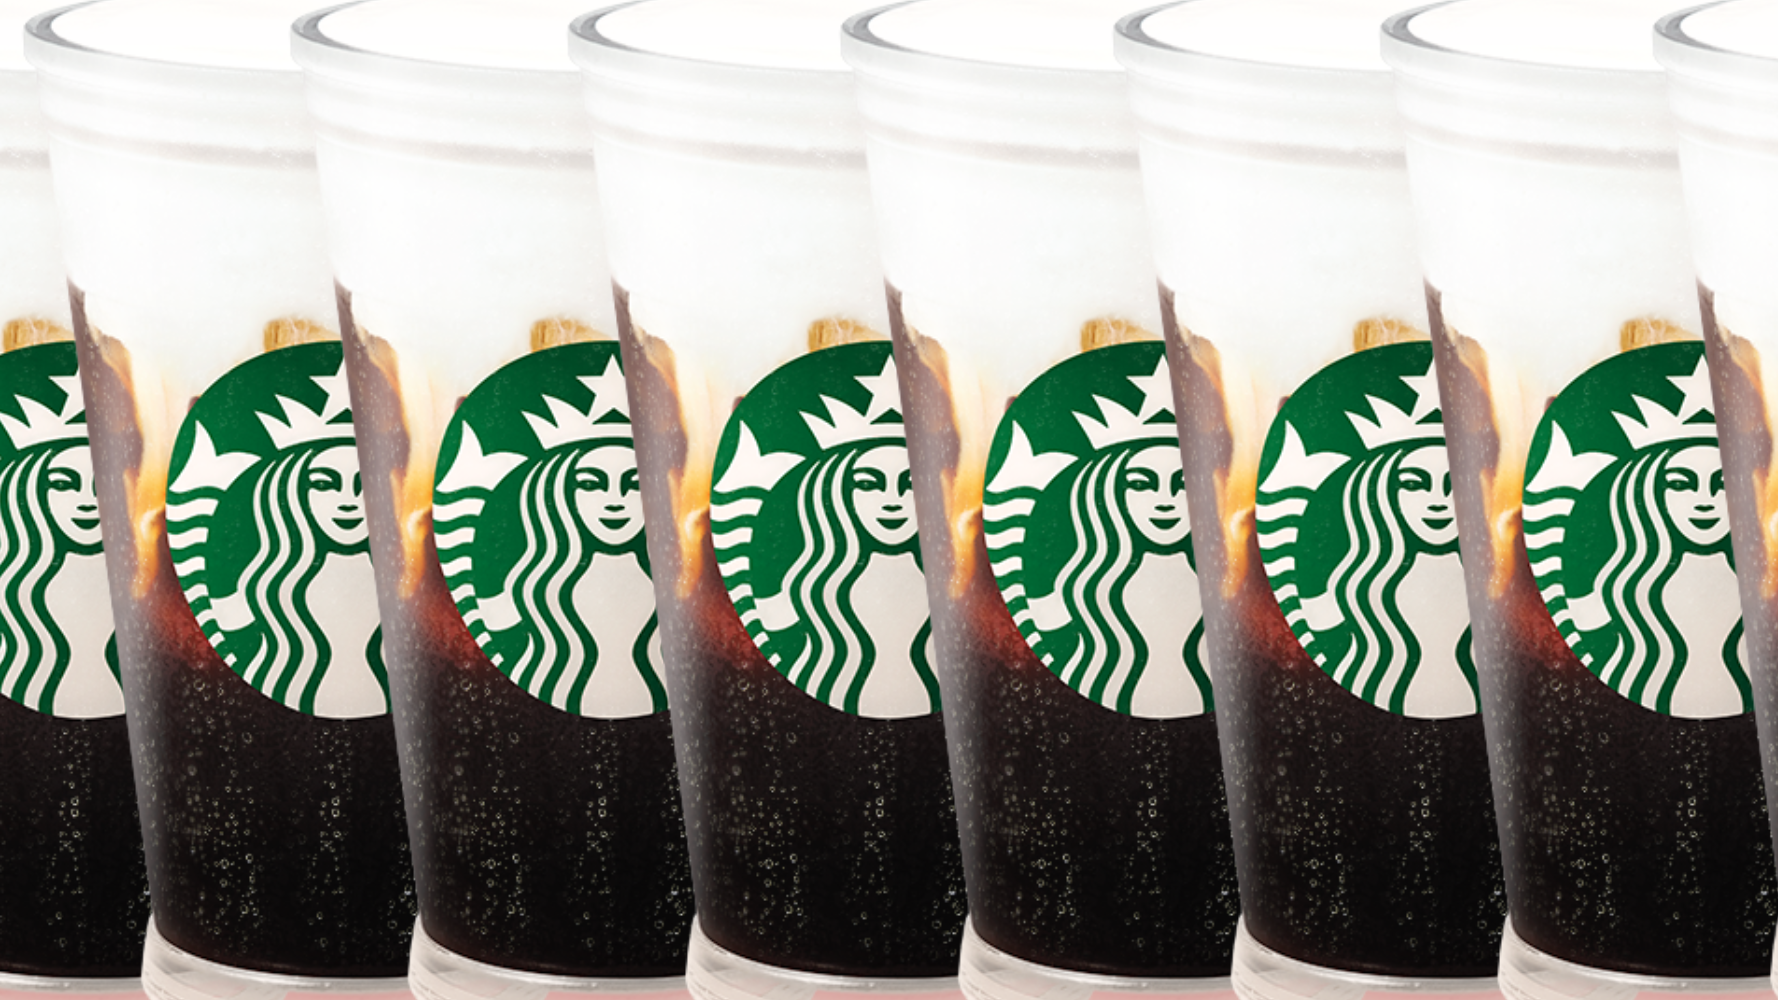 Starbucks Just Released Even More Stanley Cups So, It's Time to Make Room  in Your Cupboard